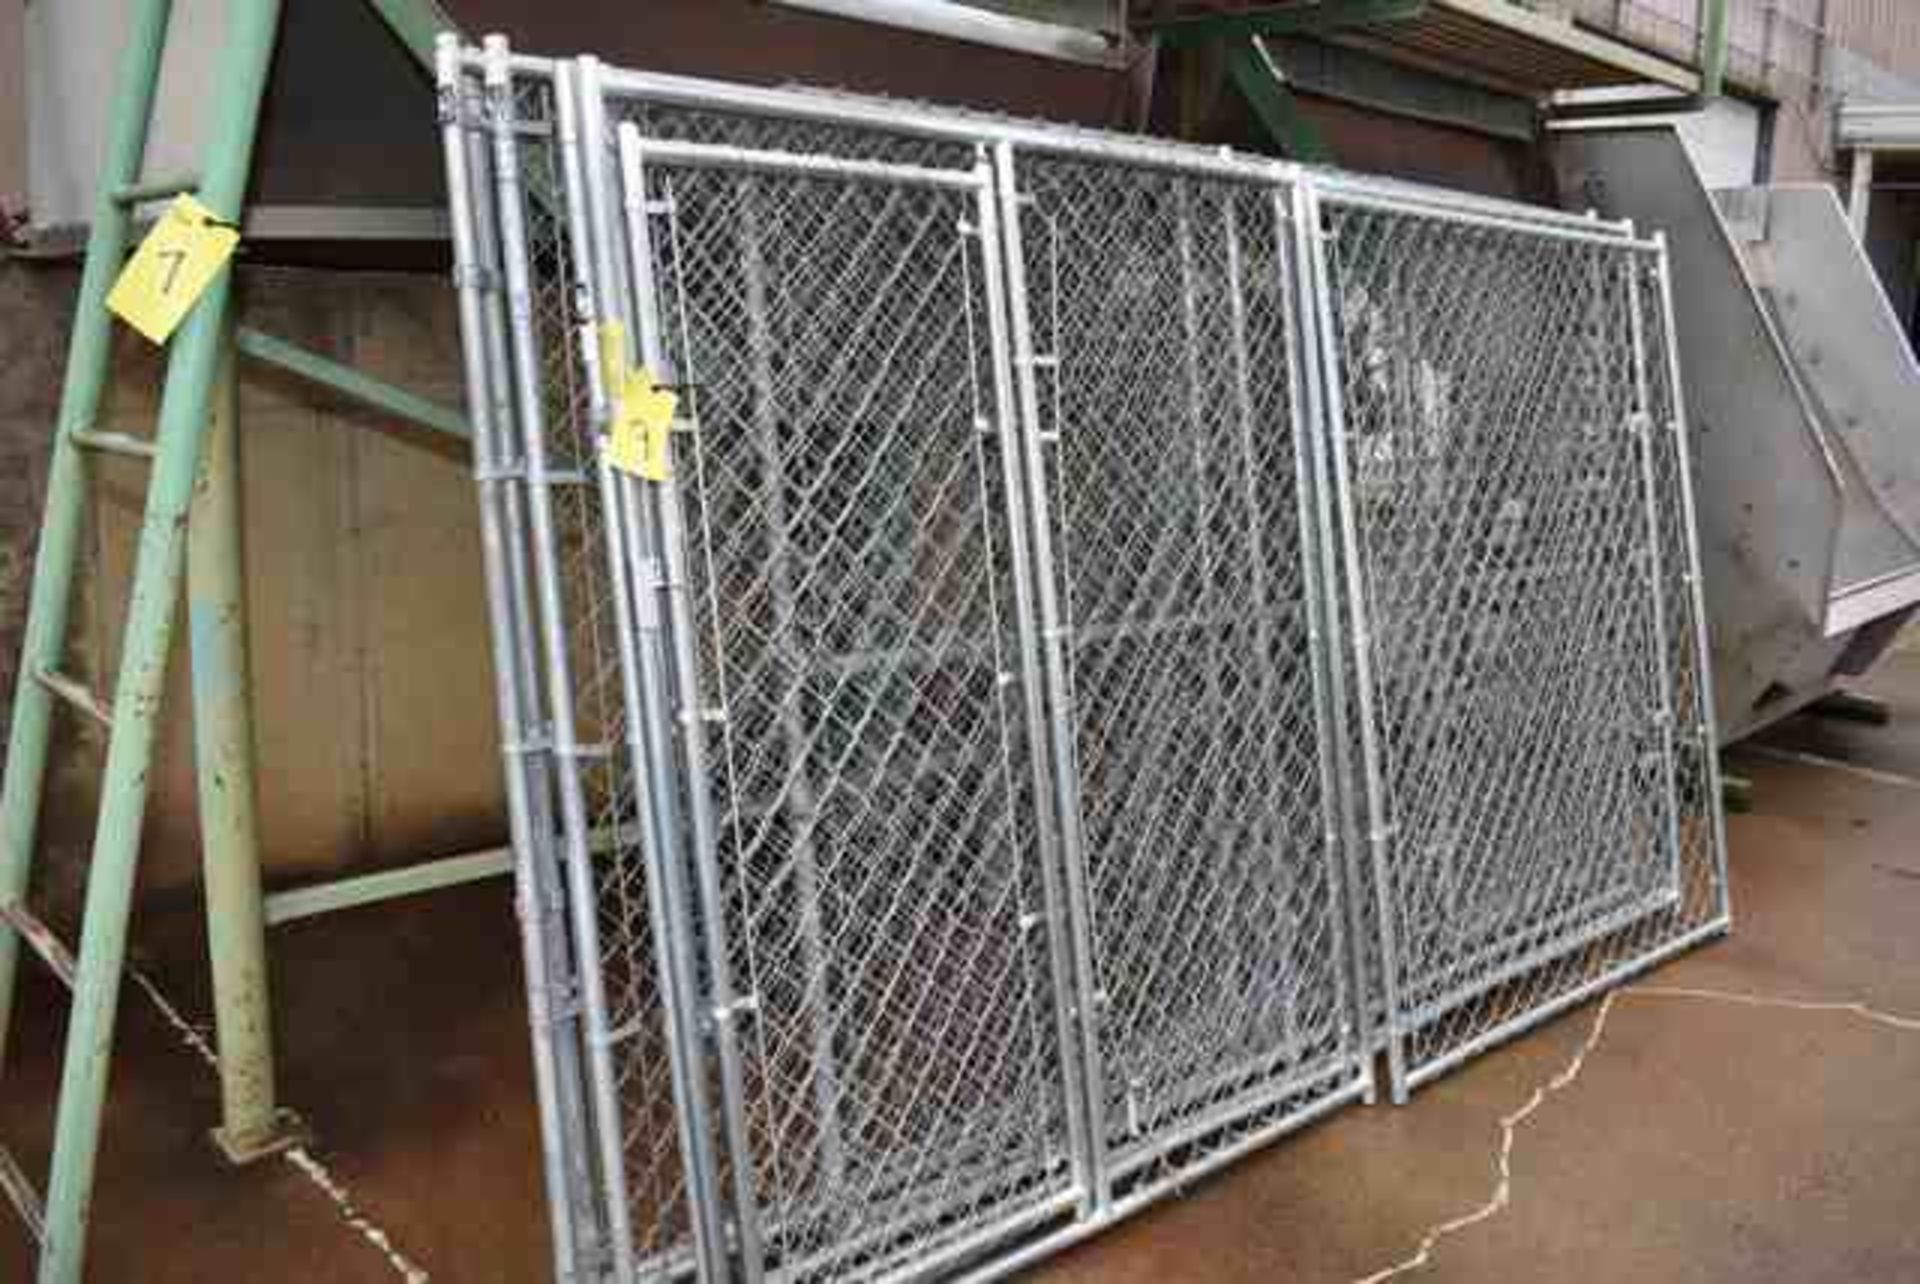 Kennel Panel Chain Link Fence, Item #171-1674, Loading Fee: $100